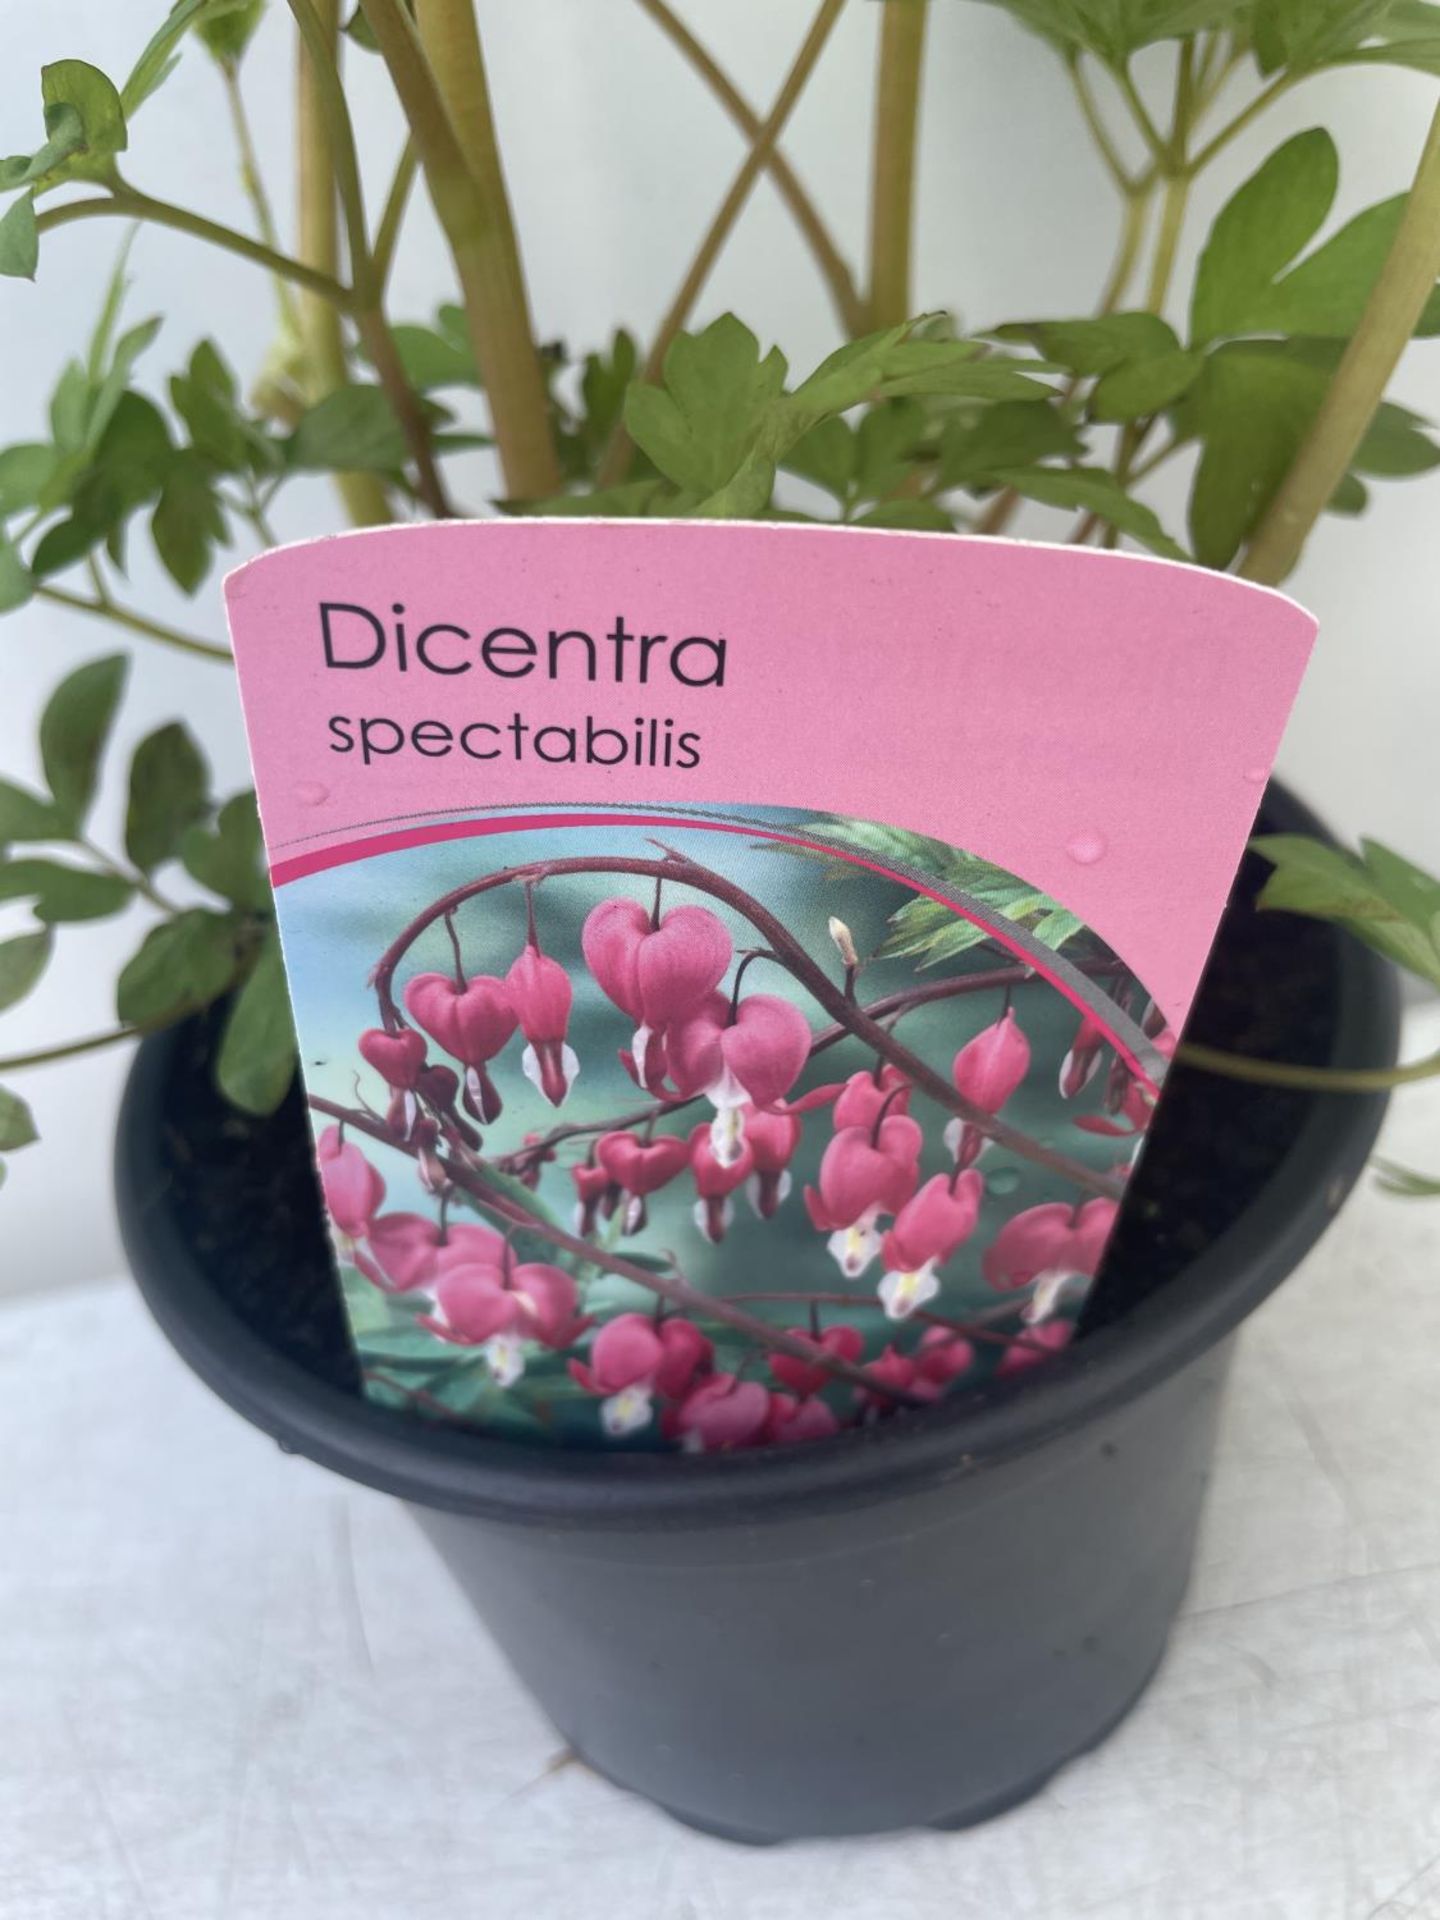 SIX DICENTRA SPECTABILIS BLEEDING HEART 50CM TALL TO BE SOLD FOR THE SIX PLUS VAT - Image 4 of 4